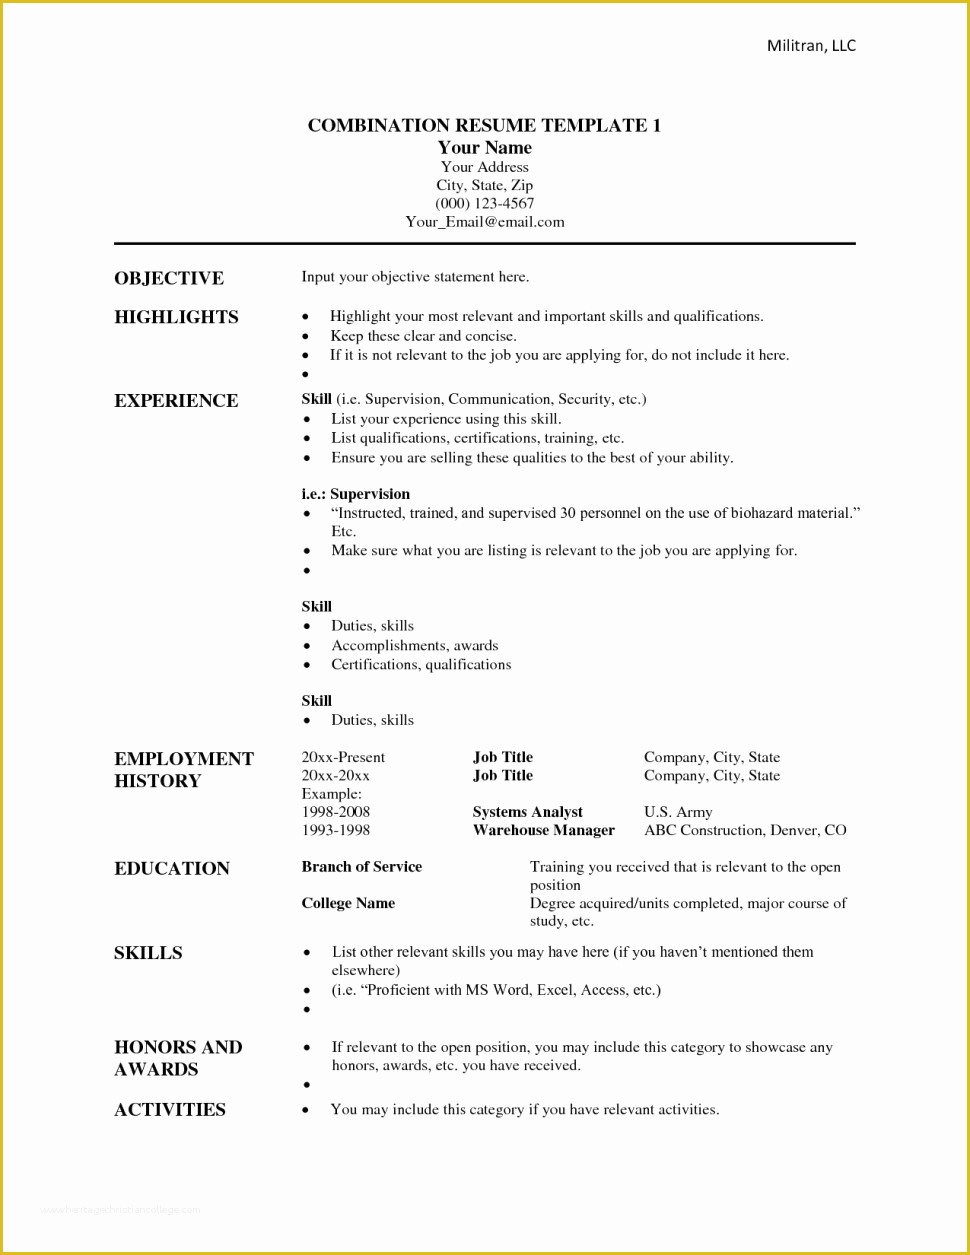 Free Combination Resume Template Of Bination Resume format Lovely Fresh Templates 2018